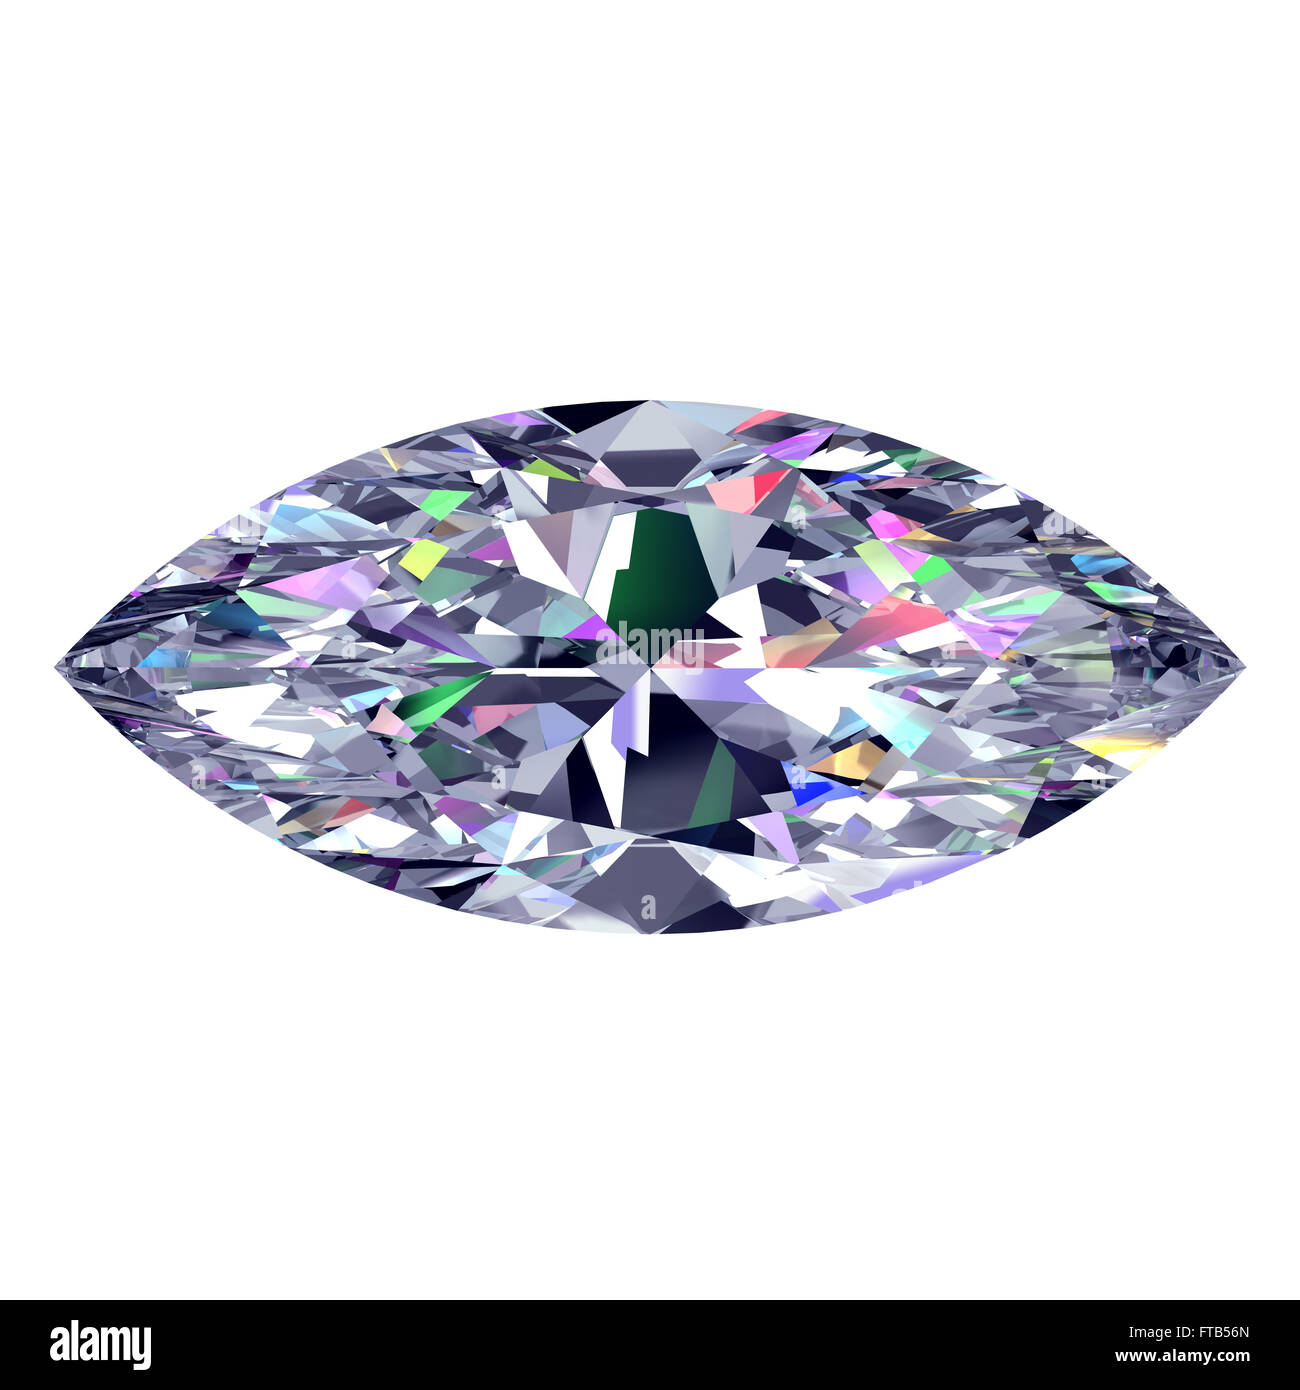 Diamond Marquise. 3D Model Over White Bacground. Stock Photo